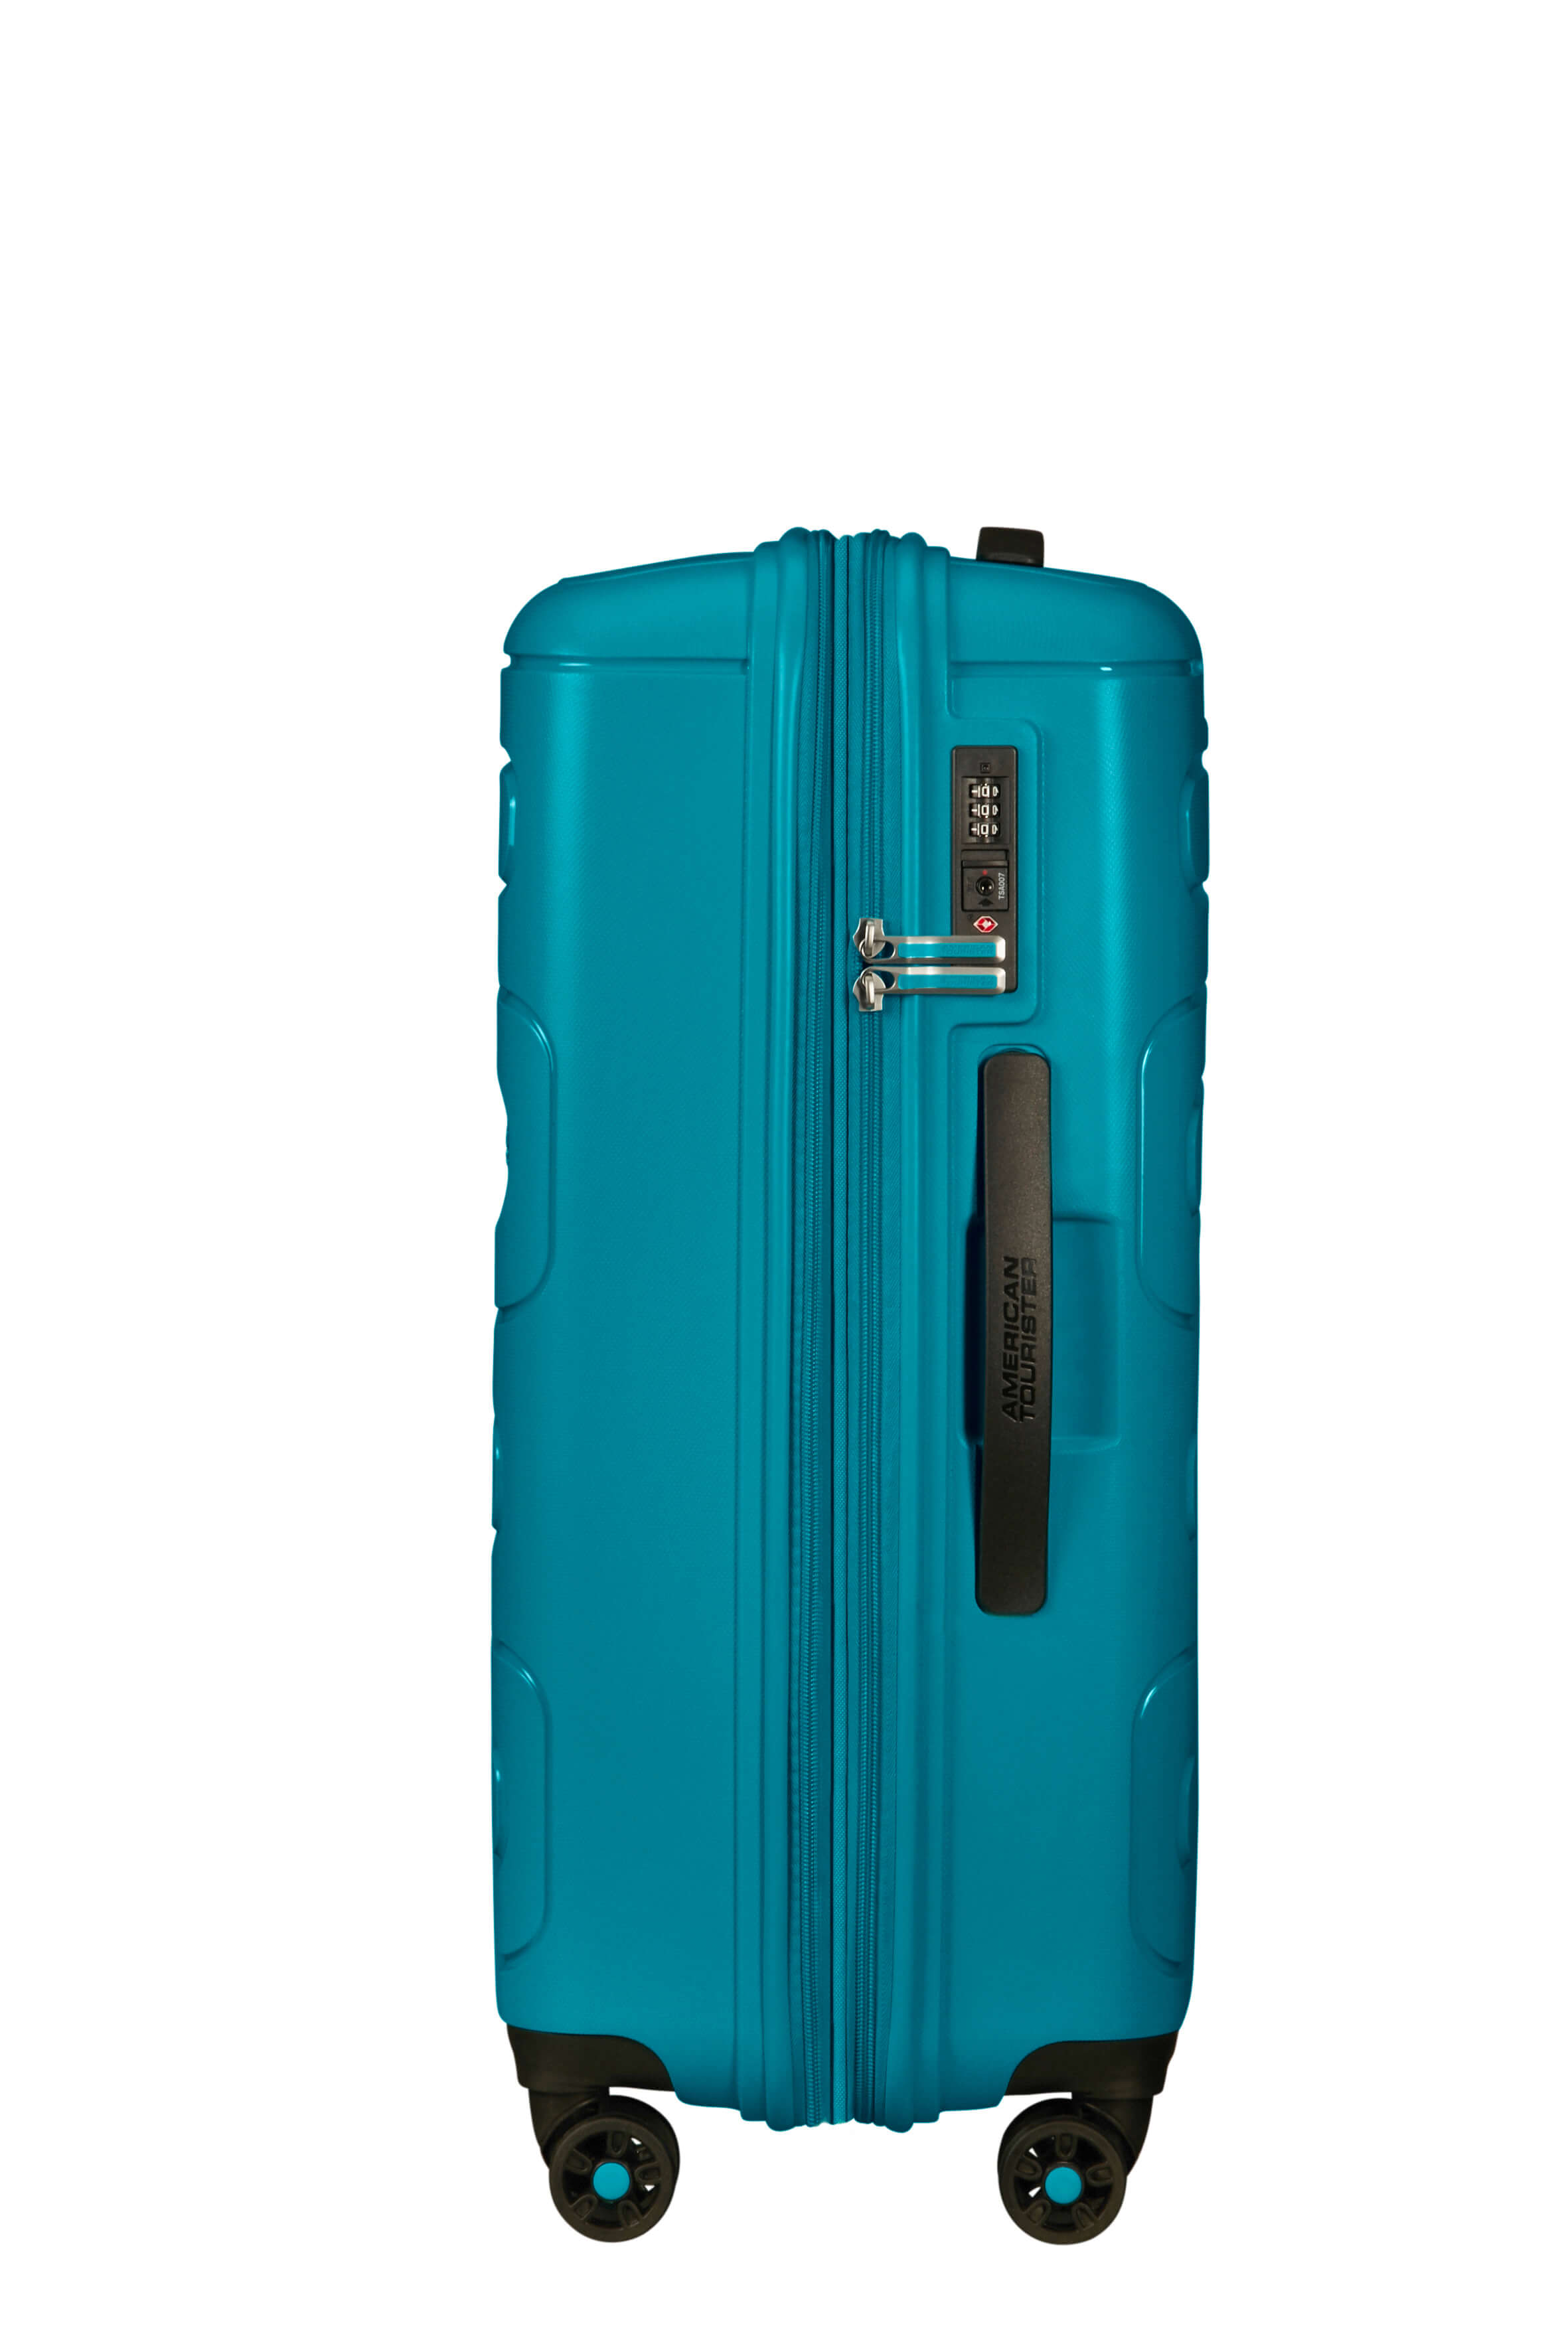 American Tourister Trolley Sunside 68cm Totally Teal